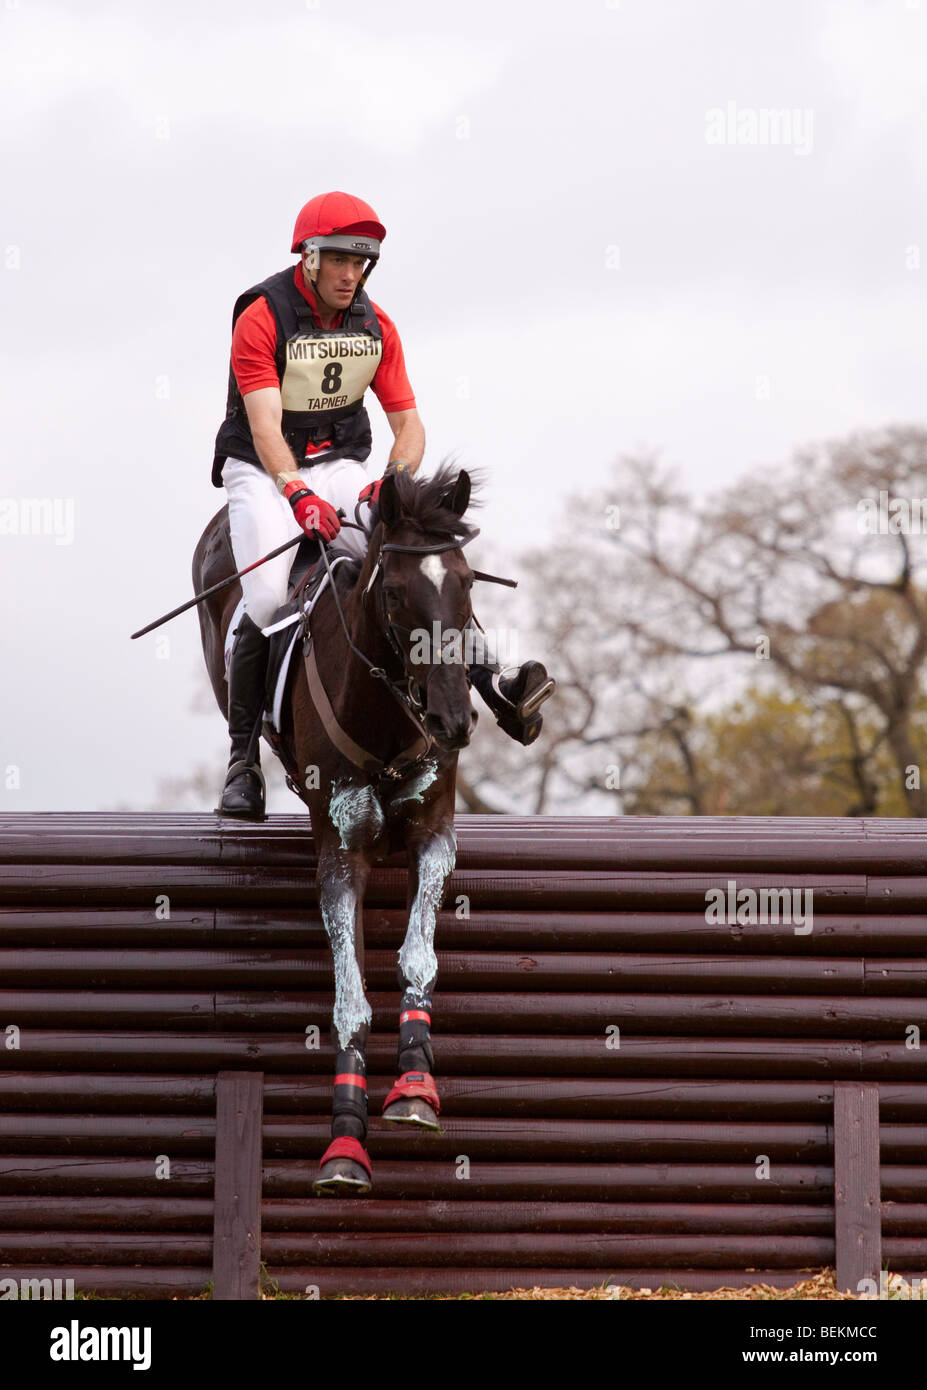 Cross country at Badminton horse trials Stock Photo